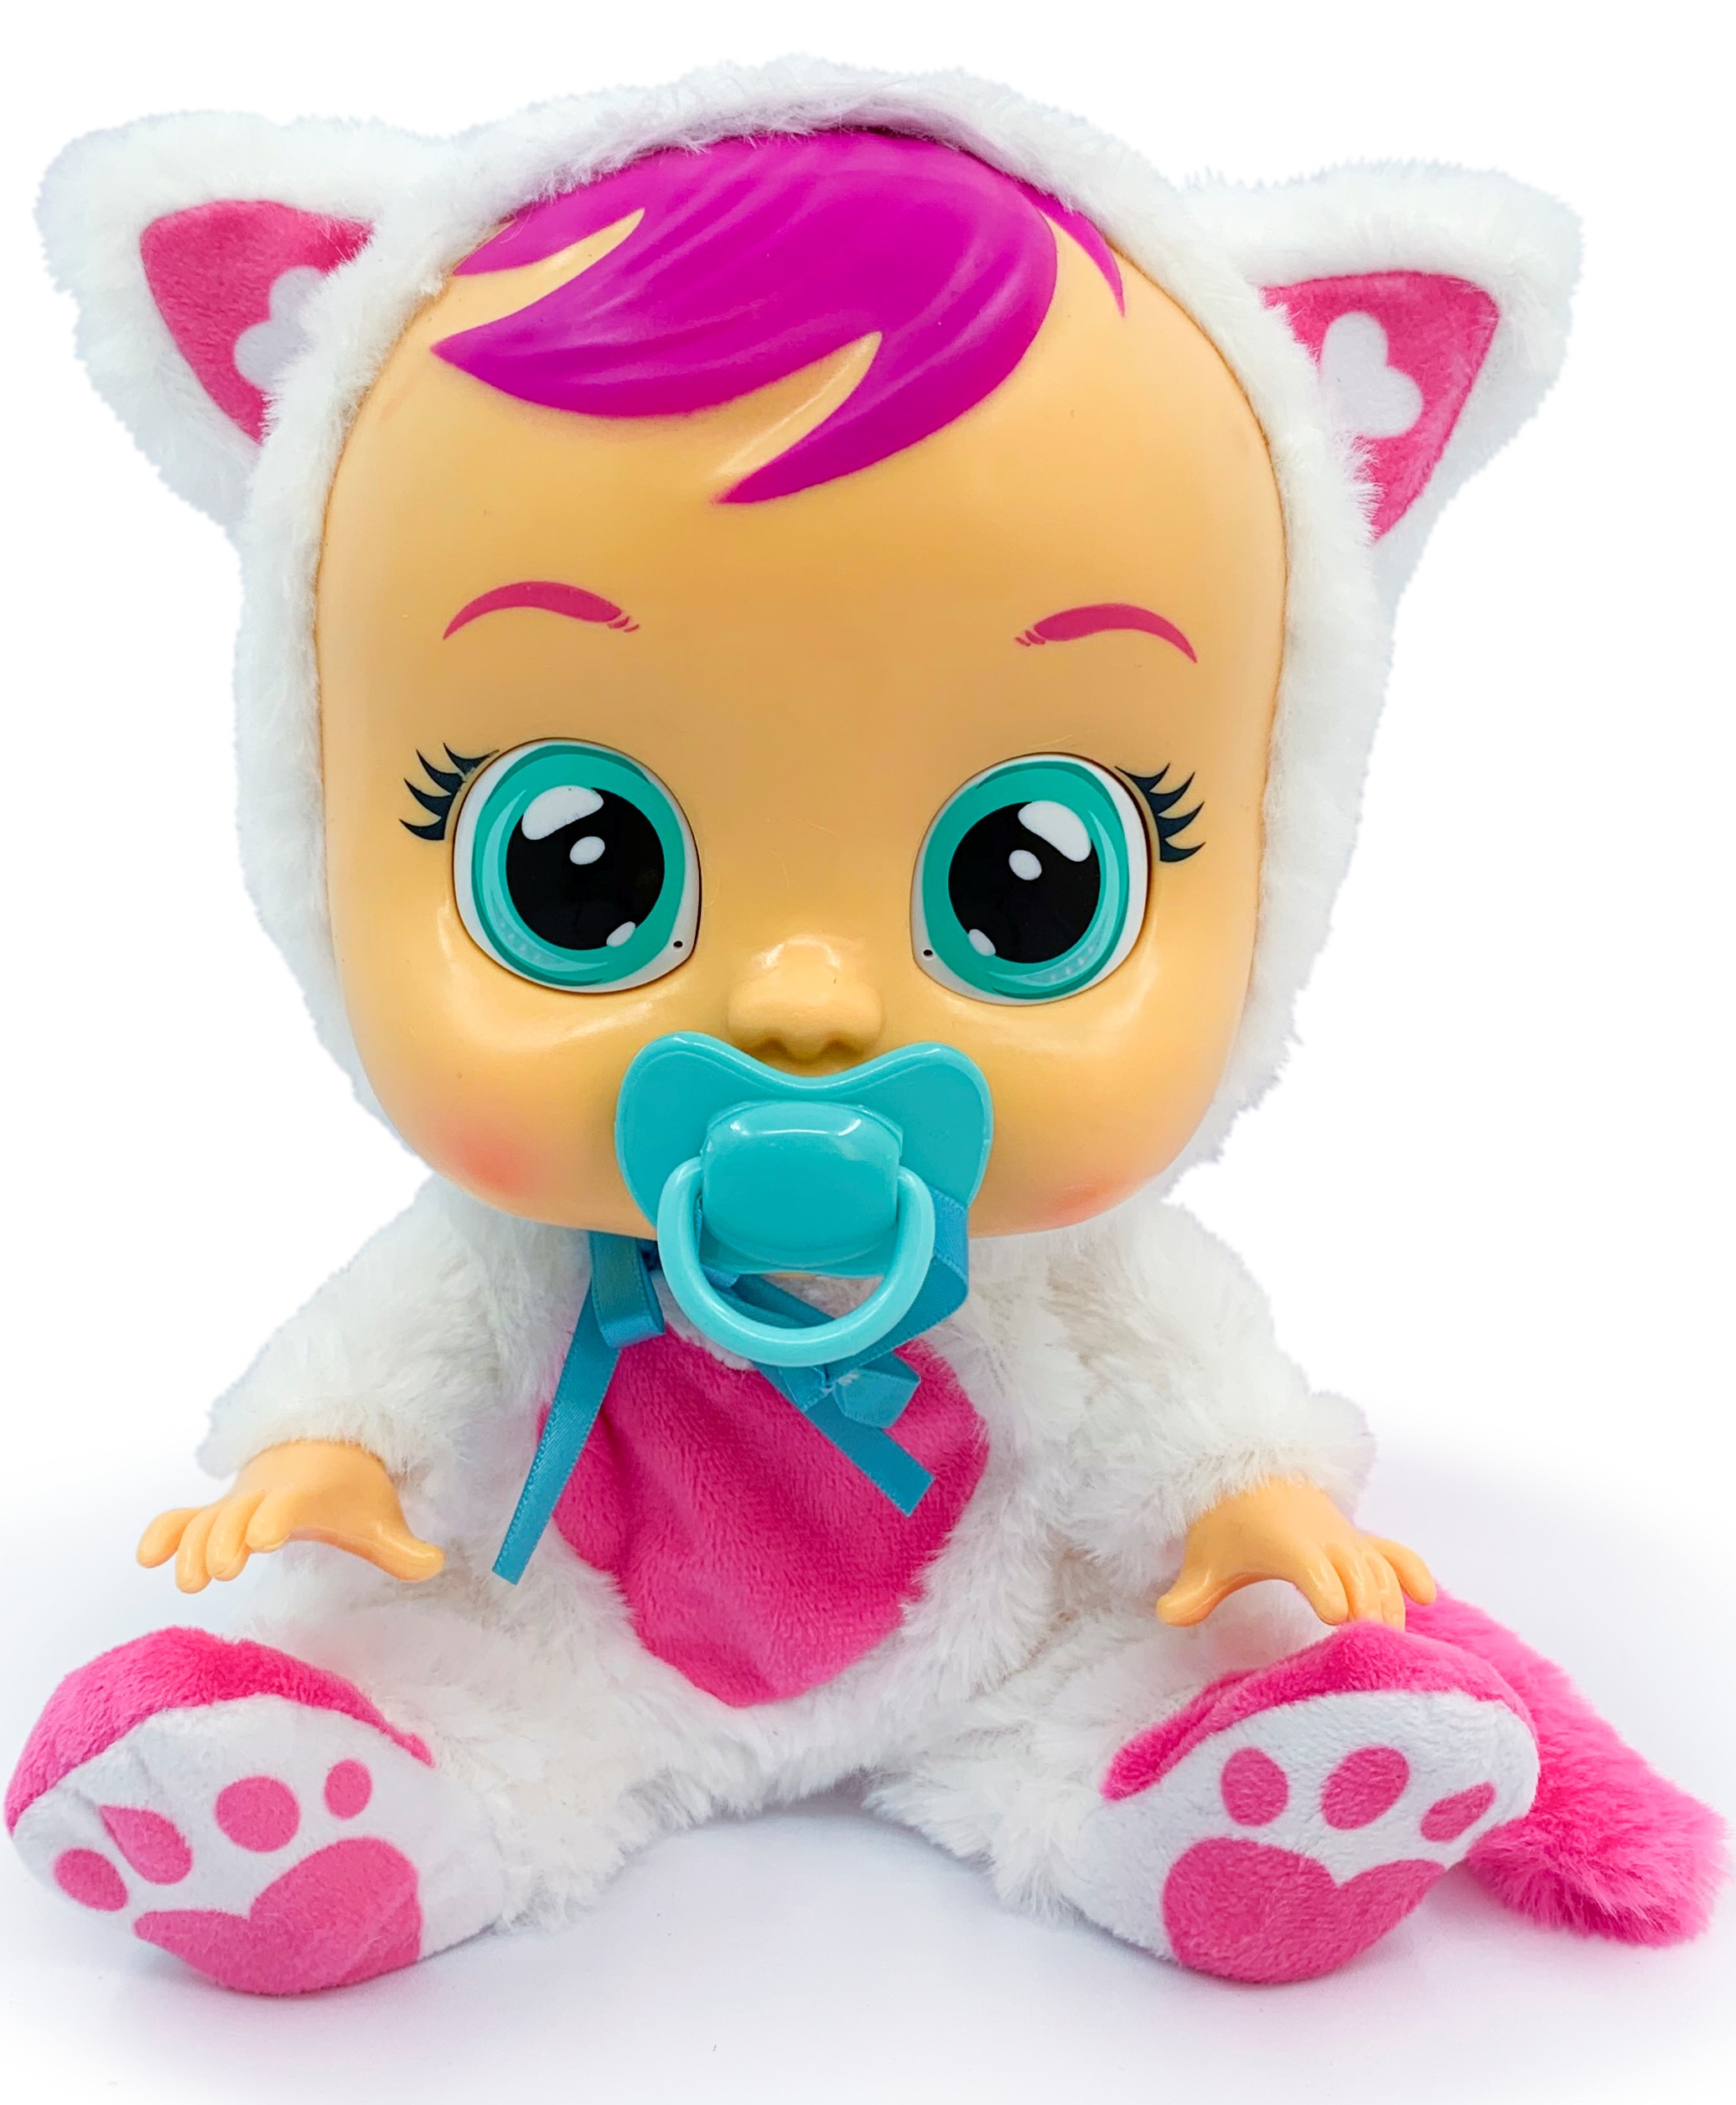 Cry Babies Daisy Doll - image 1 of 3